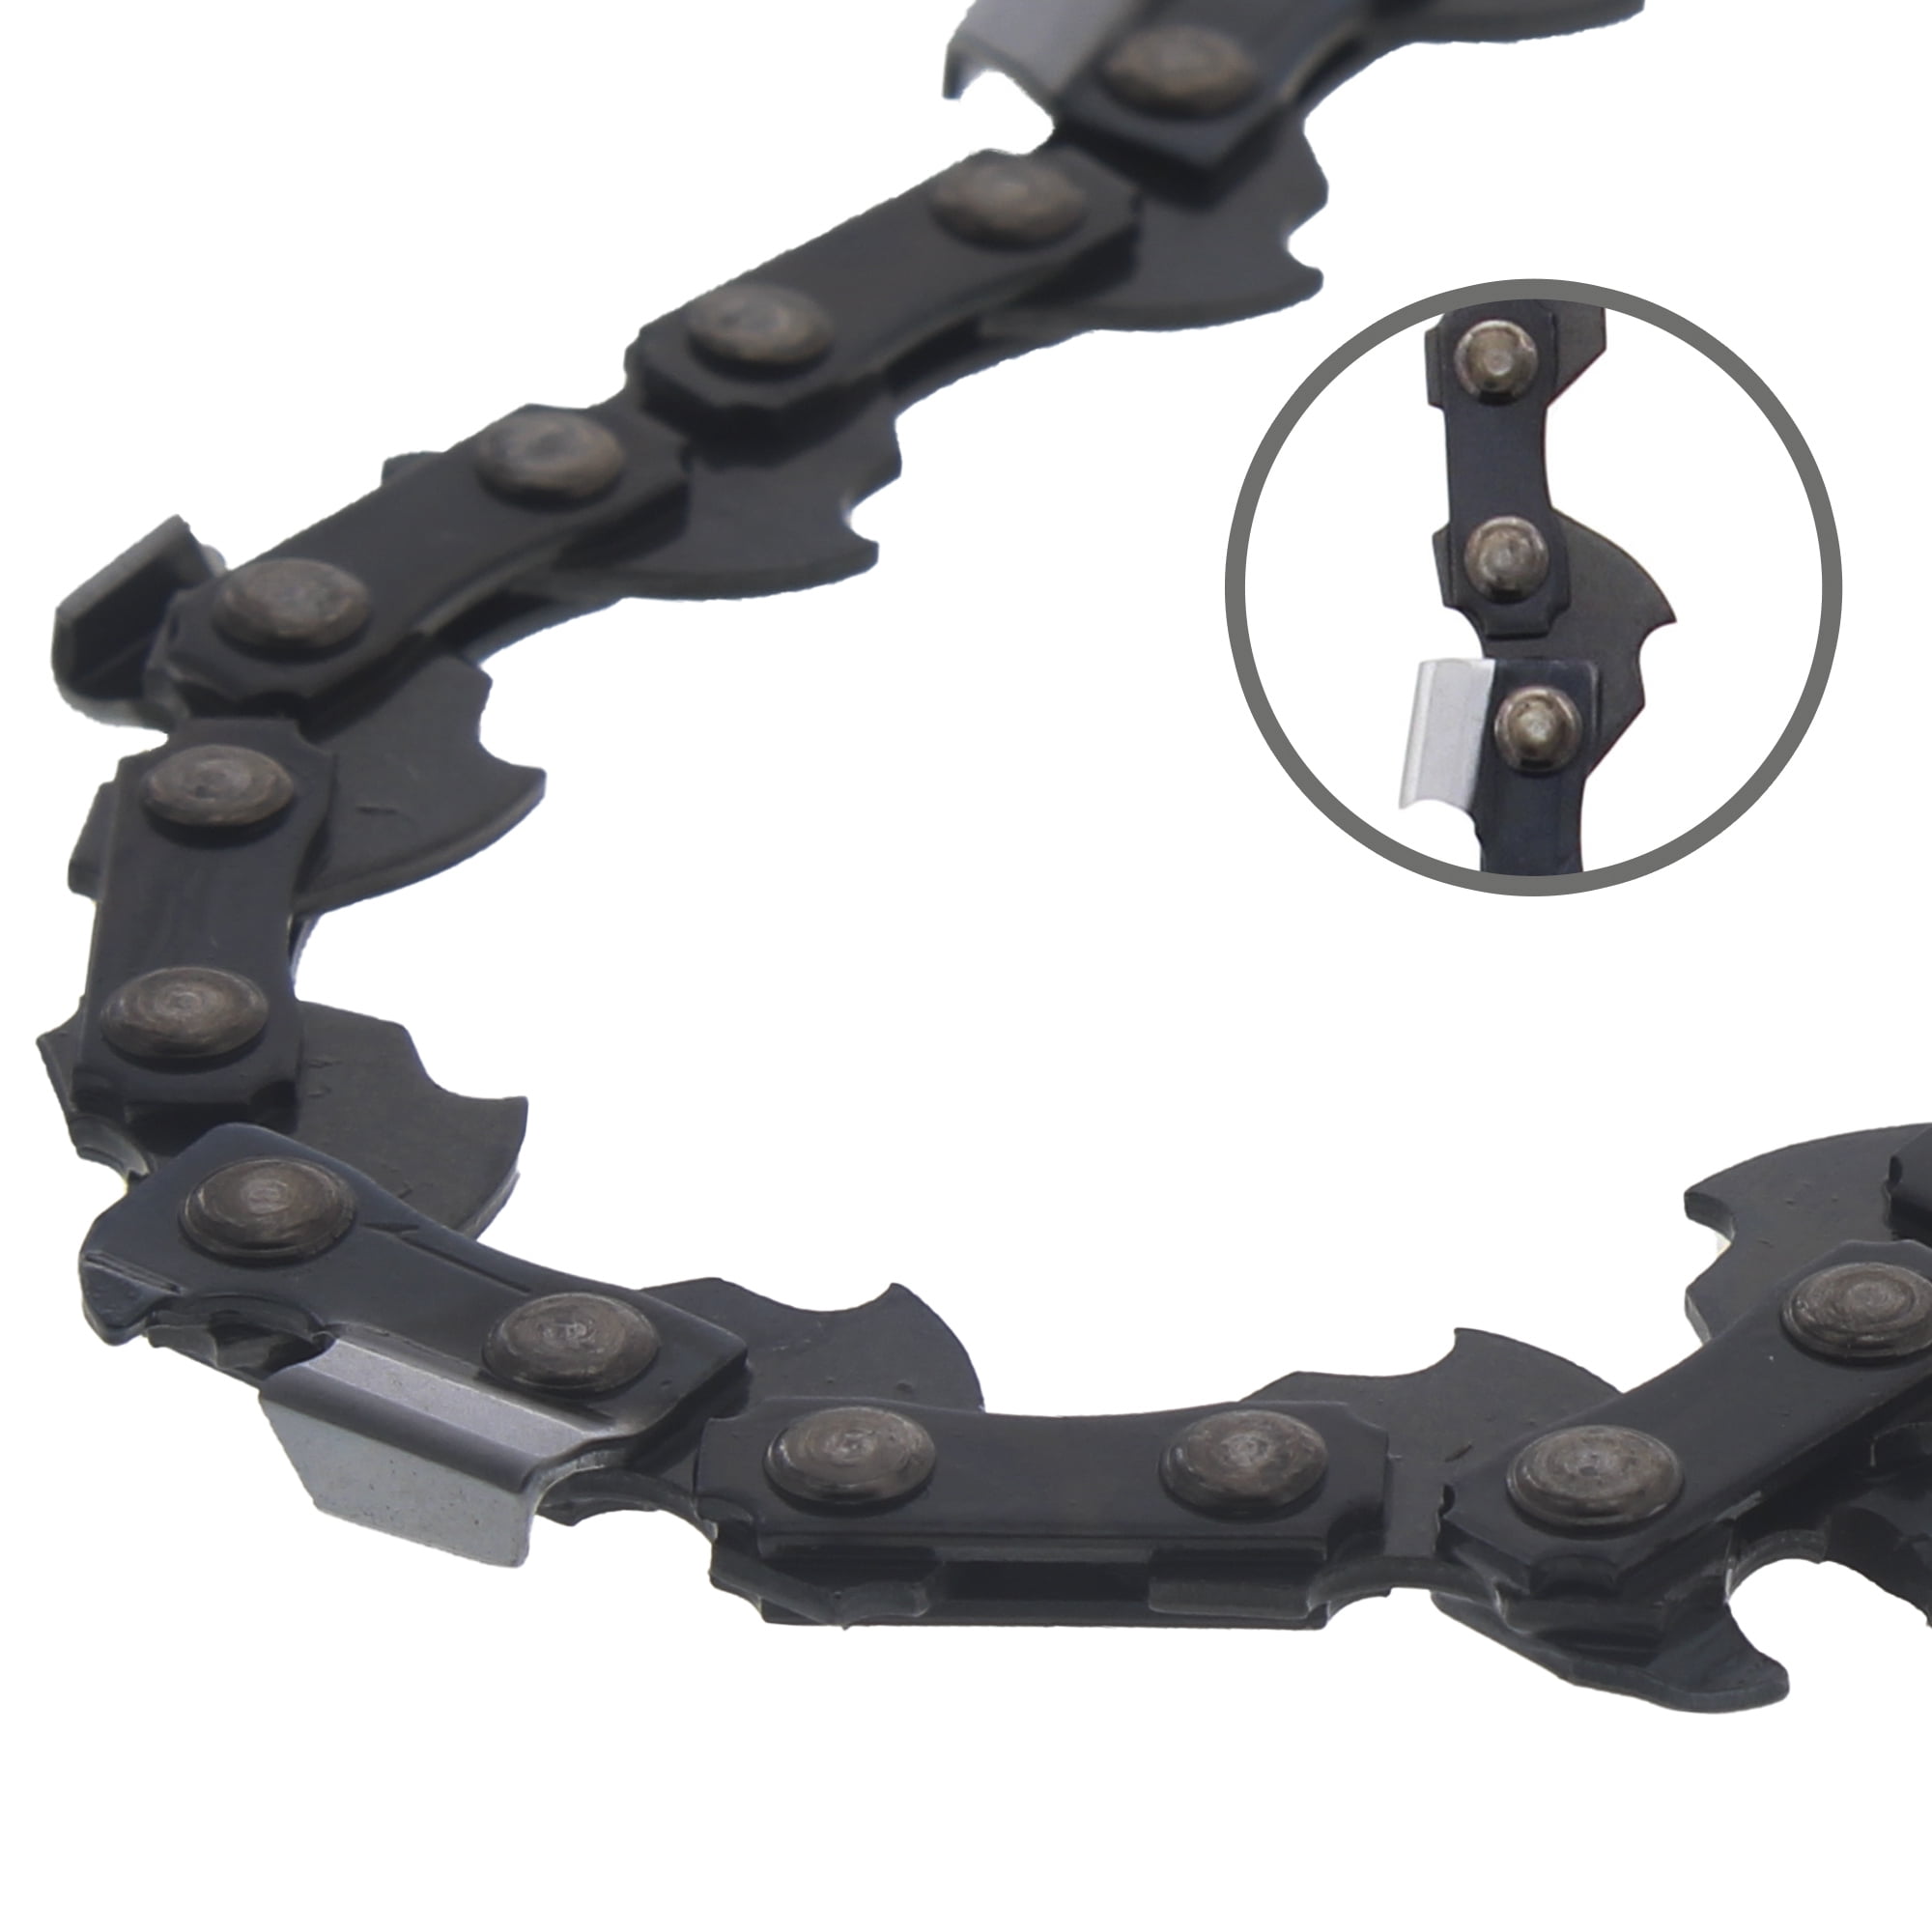 3 Pack Replacement Chain for Poulan PLN1514 Wen 3818 Craftsman 41554 Chainsaw